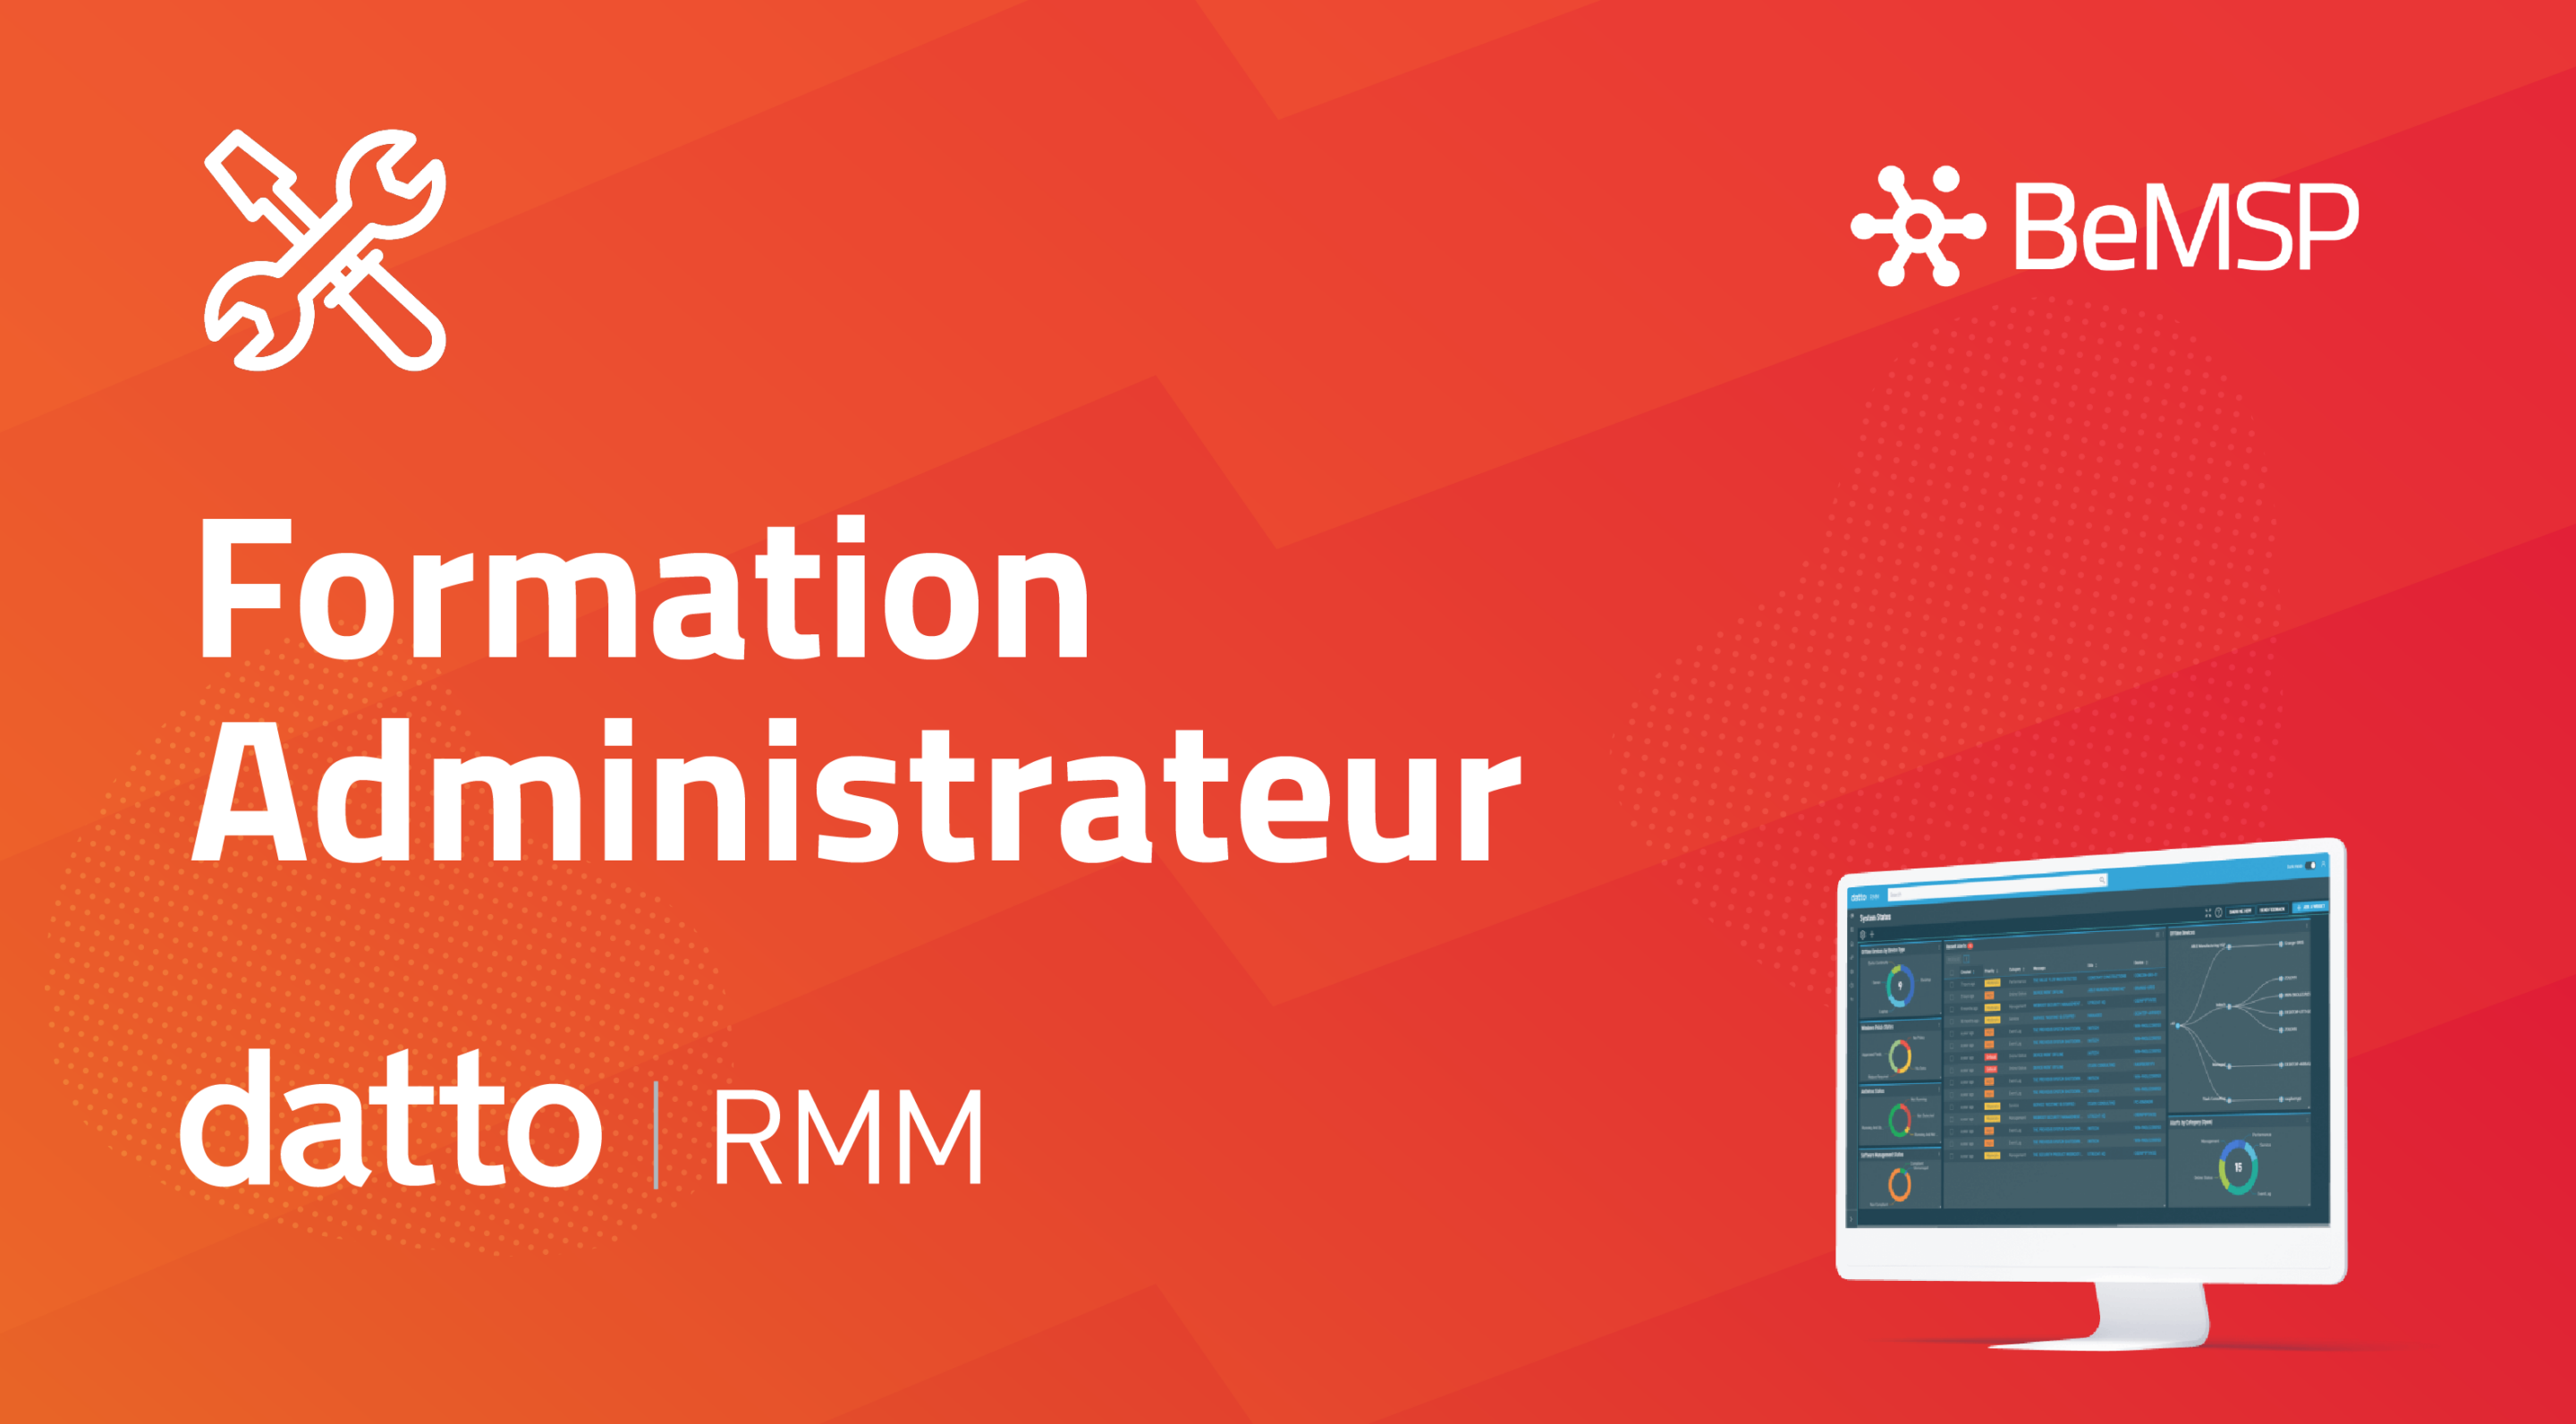 Formation Administrateur Datto RMM